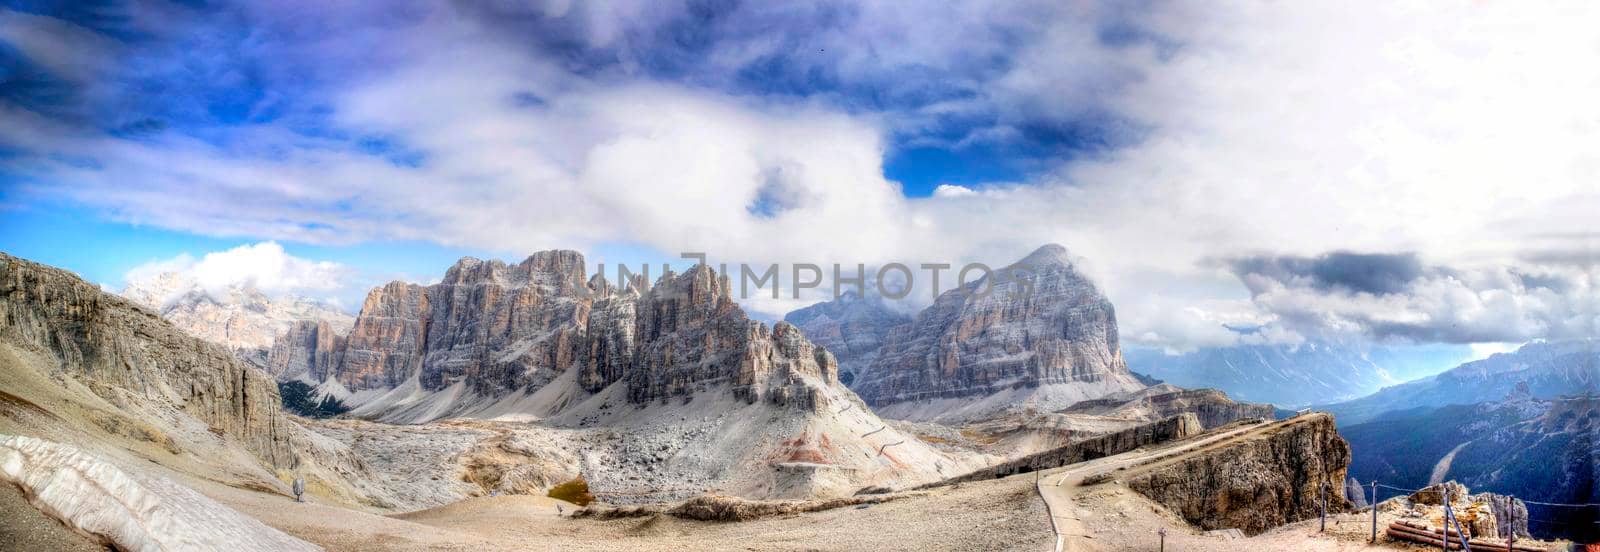 Panoramic view of the Tofane Dolomites Italy  by fotografiche.eu